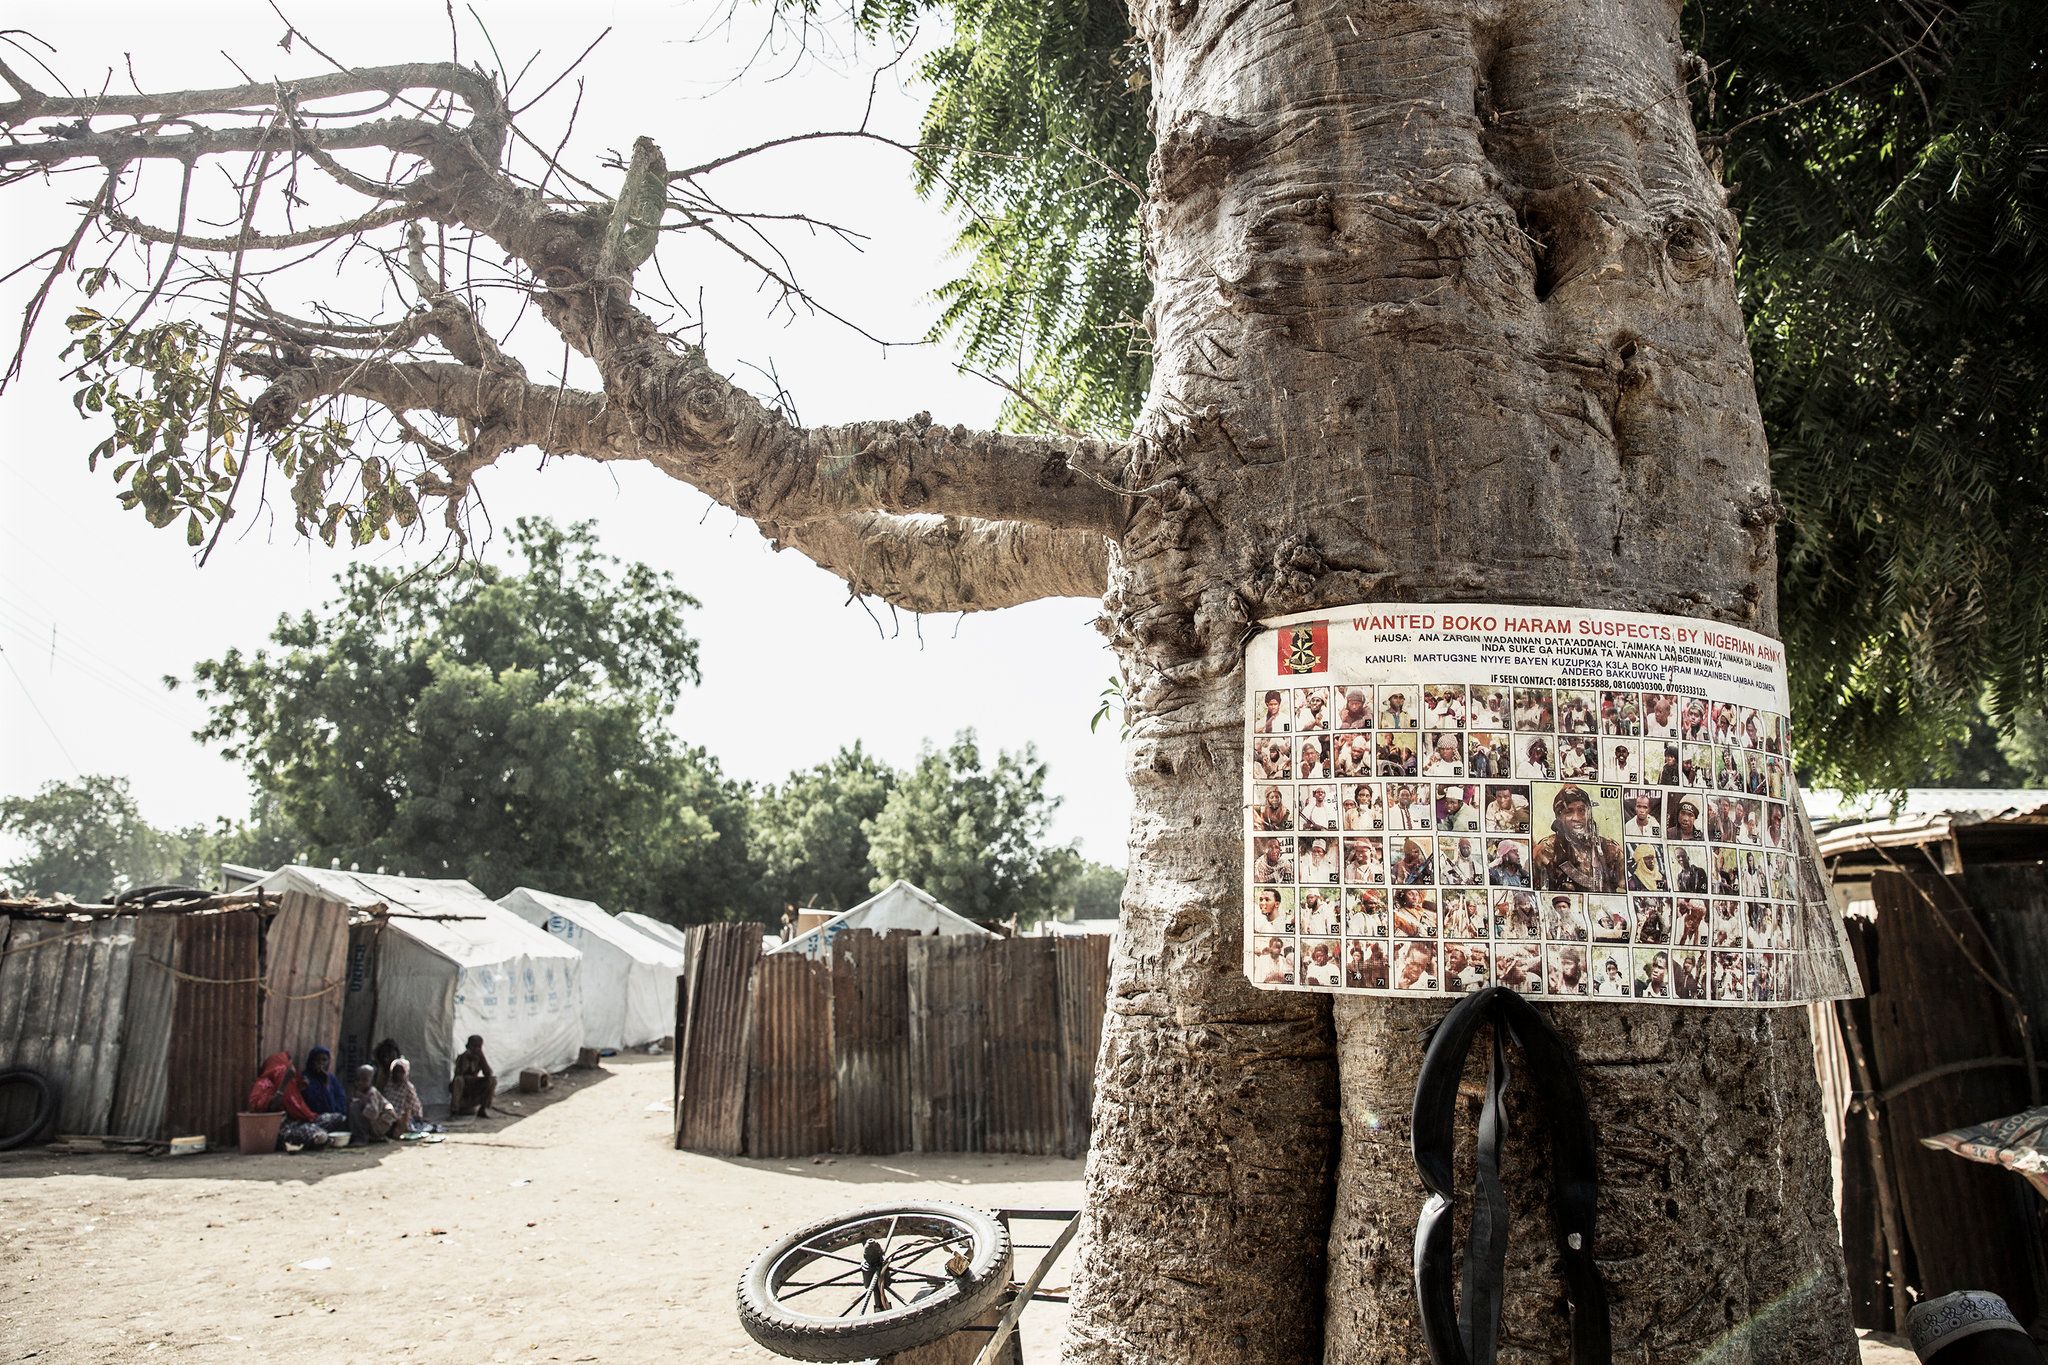 A sign at a refugee camp in northern Nigeria showing people wanted on suspicion of being Boko Haram members. Image by Glenna Gordon. Nigeria, 2017. 